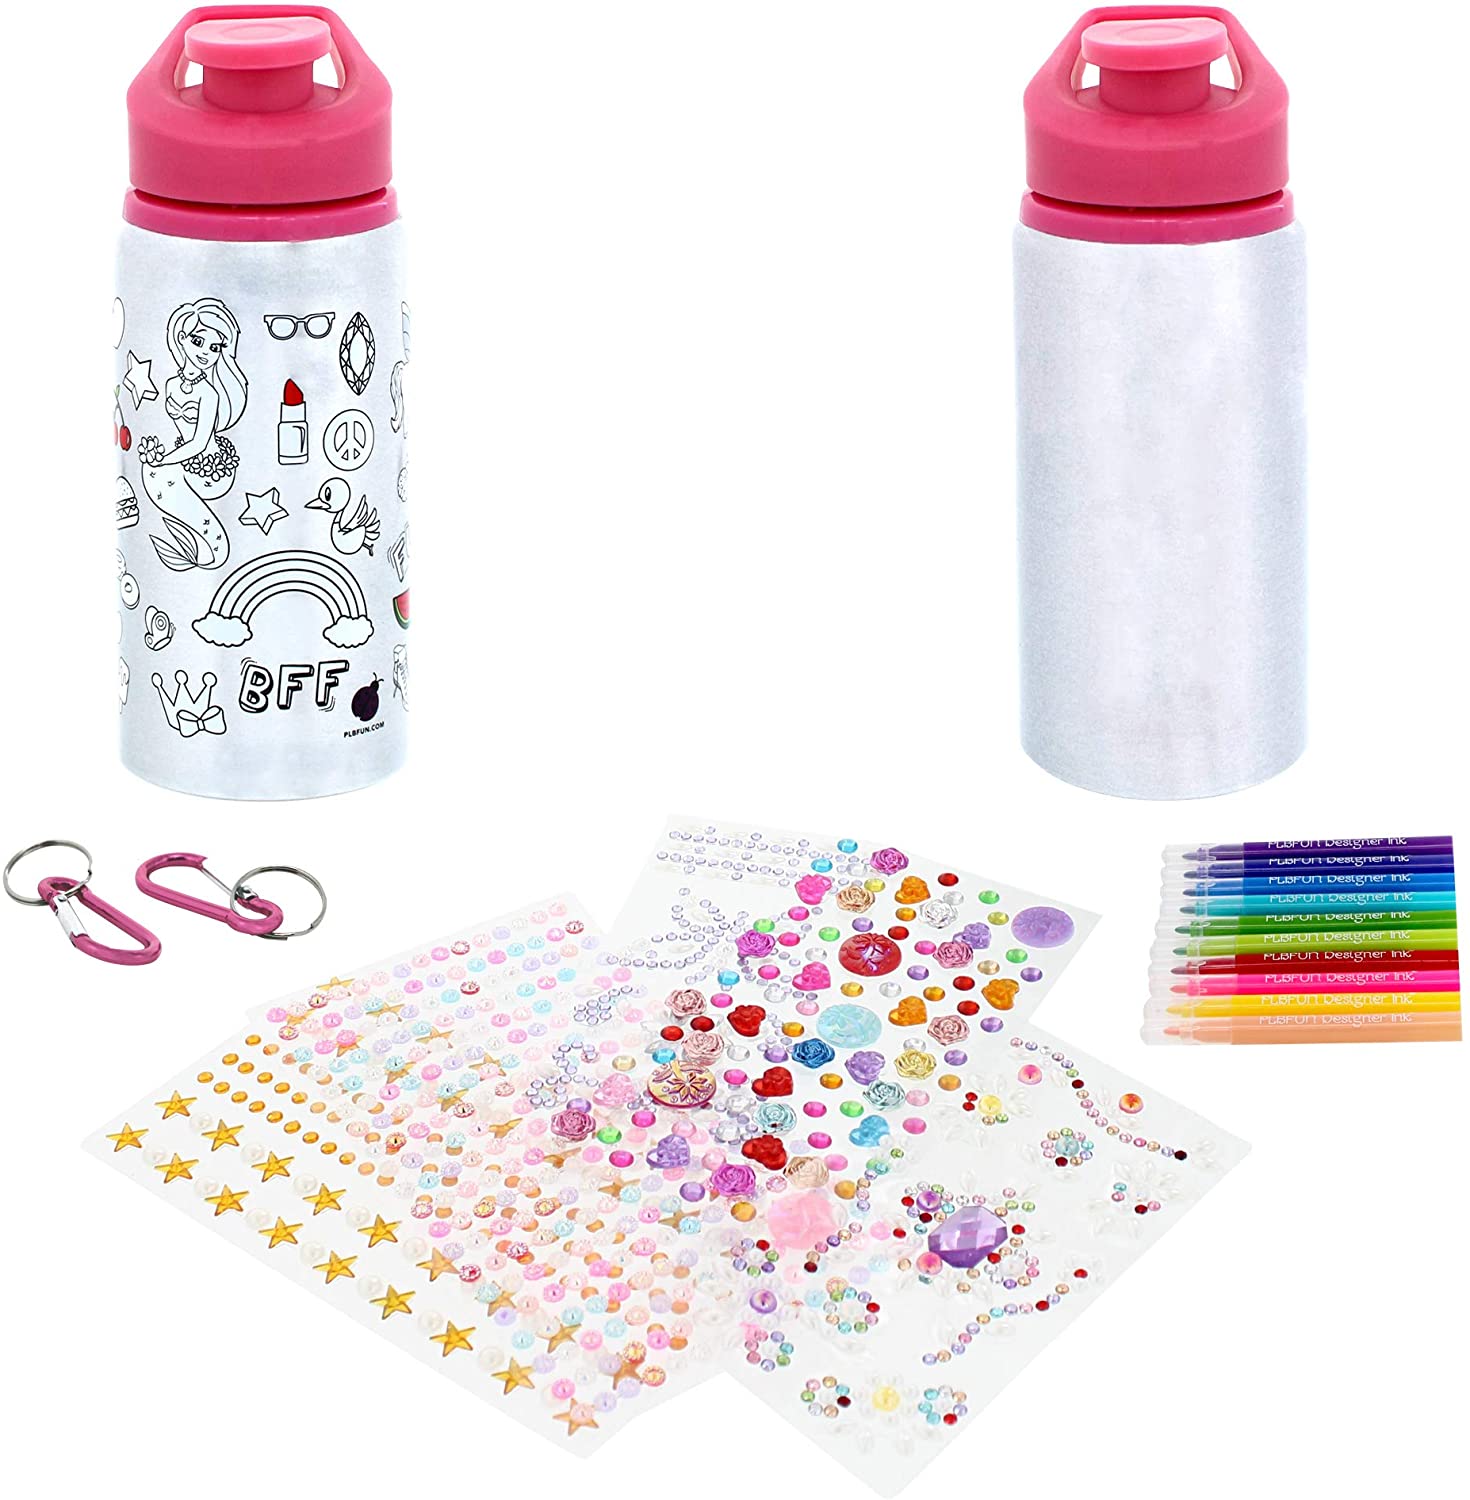 L.O.L. Surprise! Color Your Own Water Bottle - DIY Bottle Coloring Craft  Kit - BPA Free Water Bottle - Decorate Your Glitter Water Bottle For Kids  Ages 5 And Up